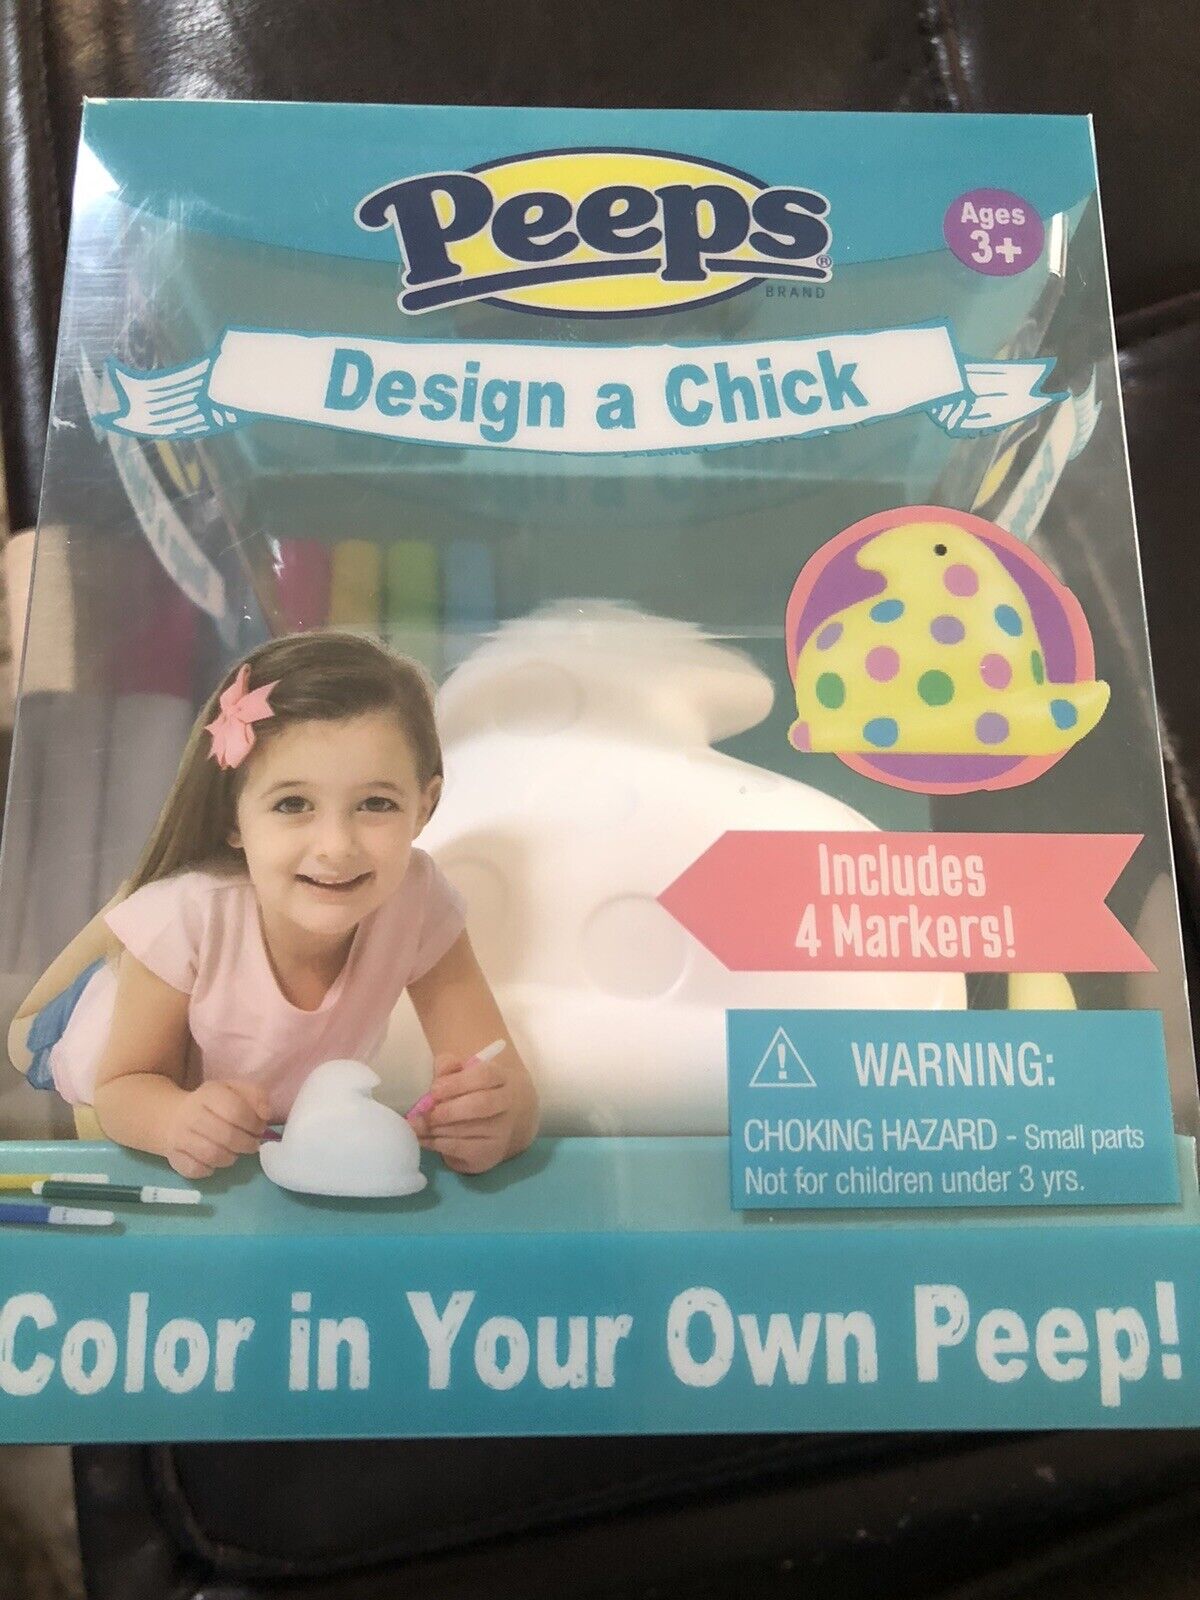 EASTER PEEPS DESIGN A CHICK, COLOR IN YOUR OWN PEEP. GREAT FOR EASTER BASKET